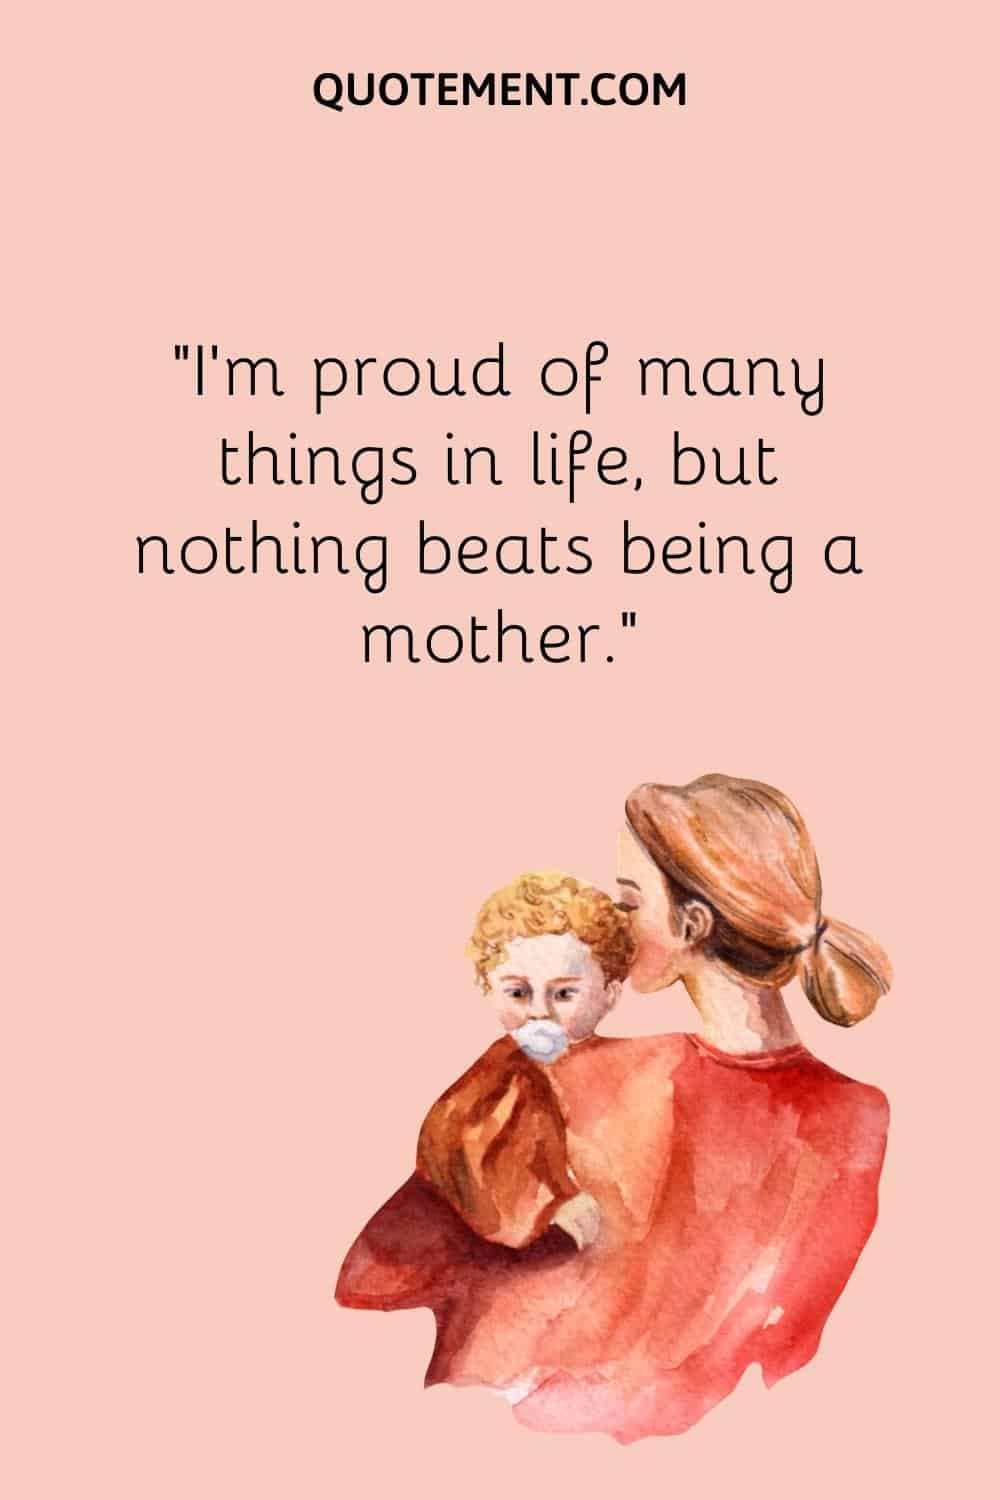 “I’m proud of many things in life, but nothing beats being a mother.”